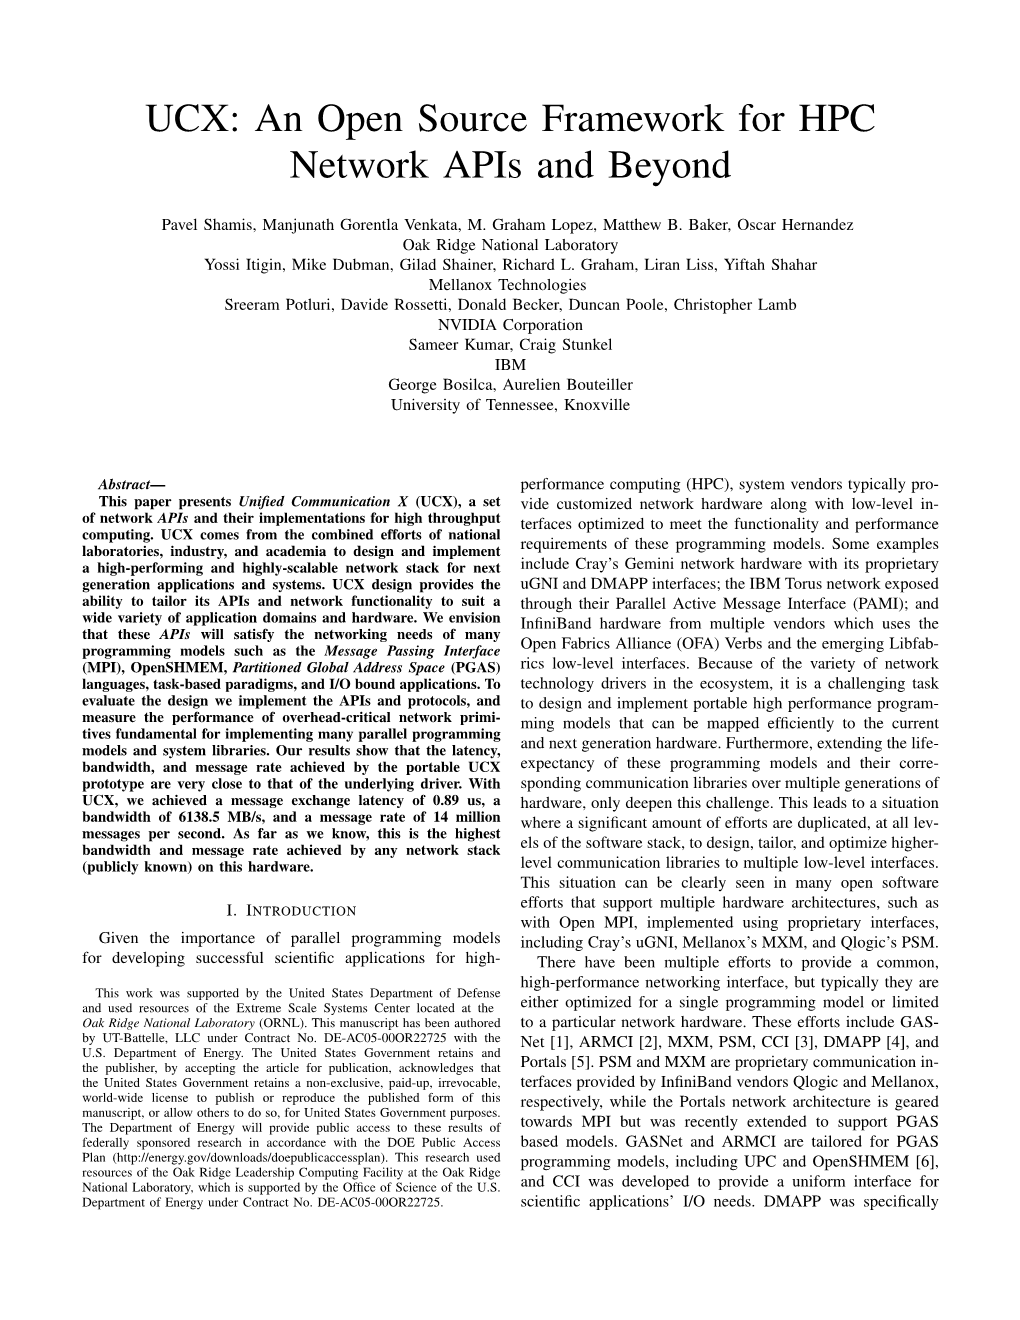 An Open Source Framework for HPC Network Apis and Beyond